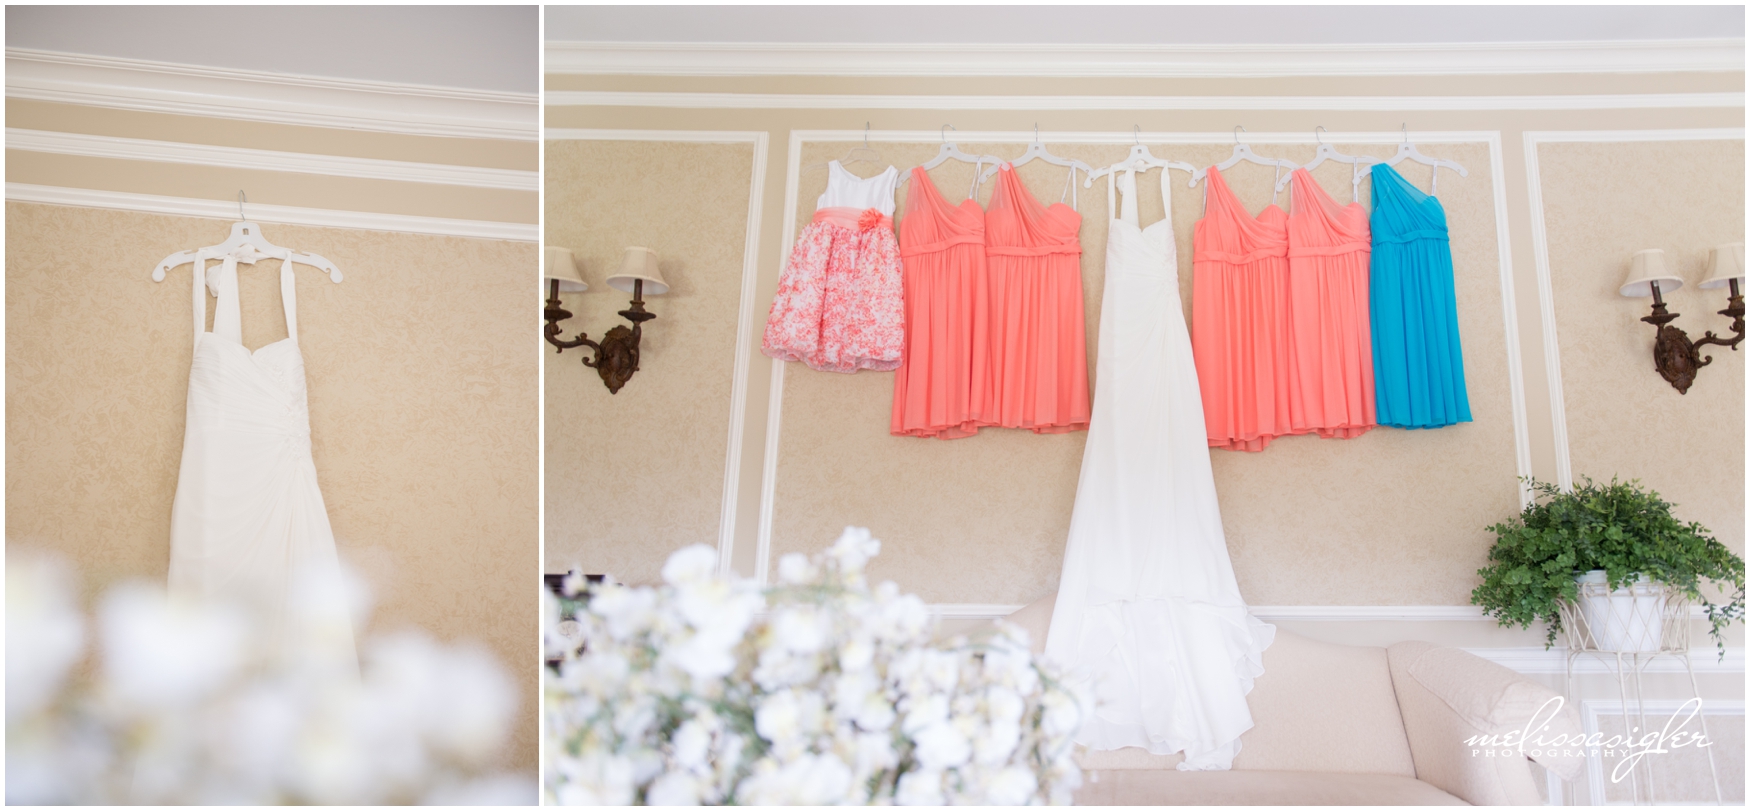 Coral and Teal bridesmaids dresses at Longview Mansion by Melissa Sigler Photography